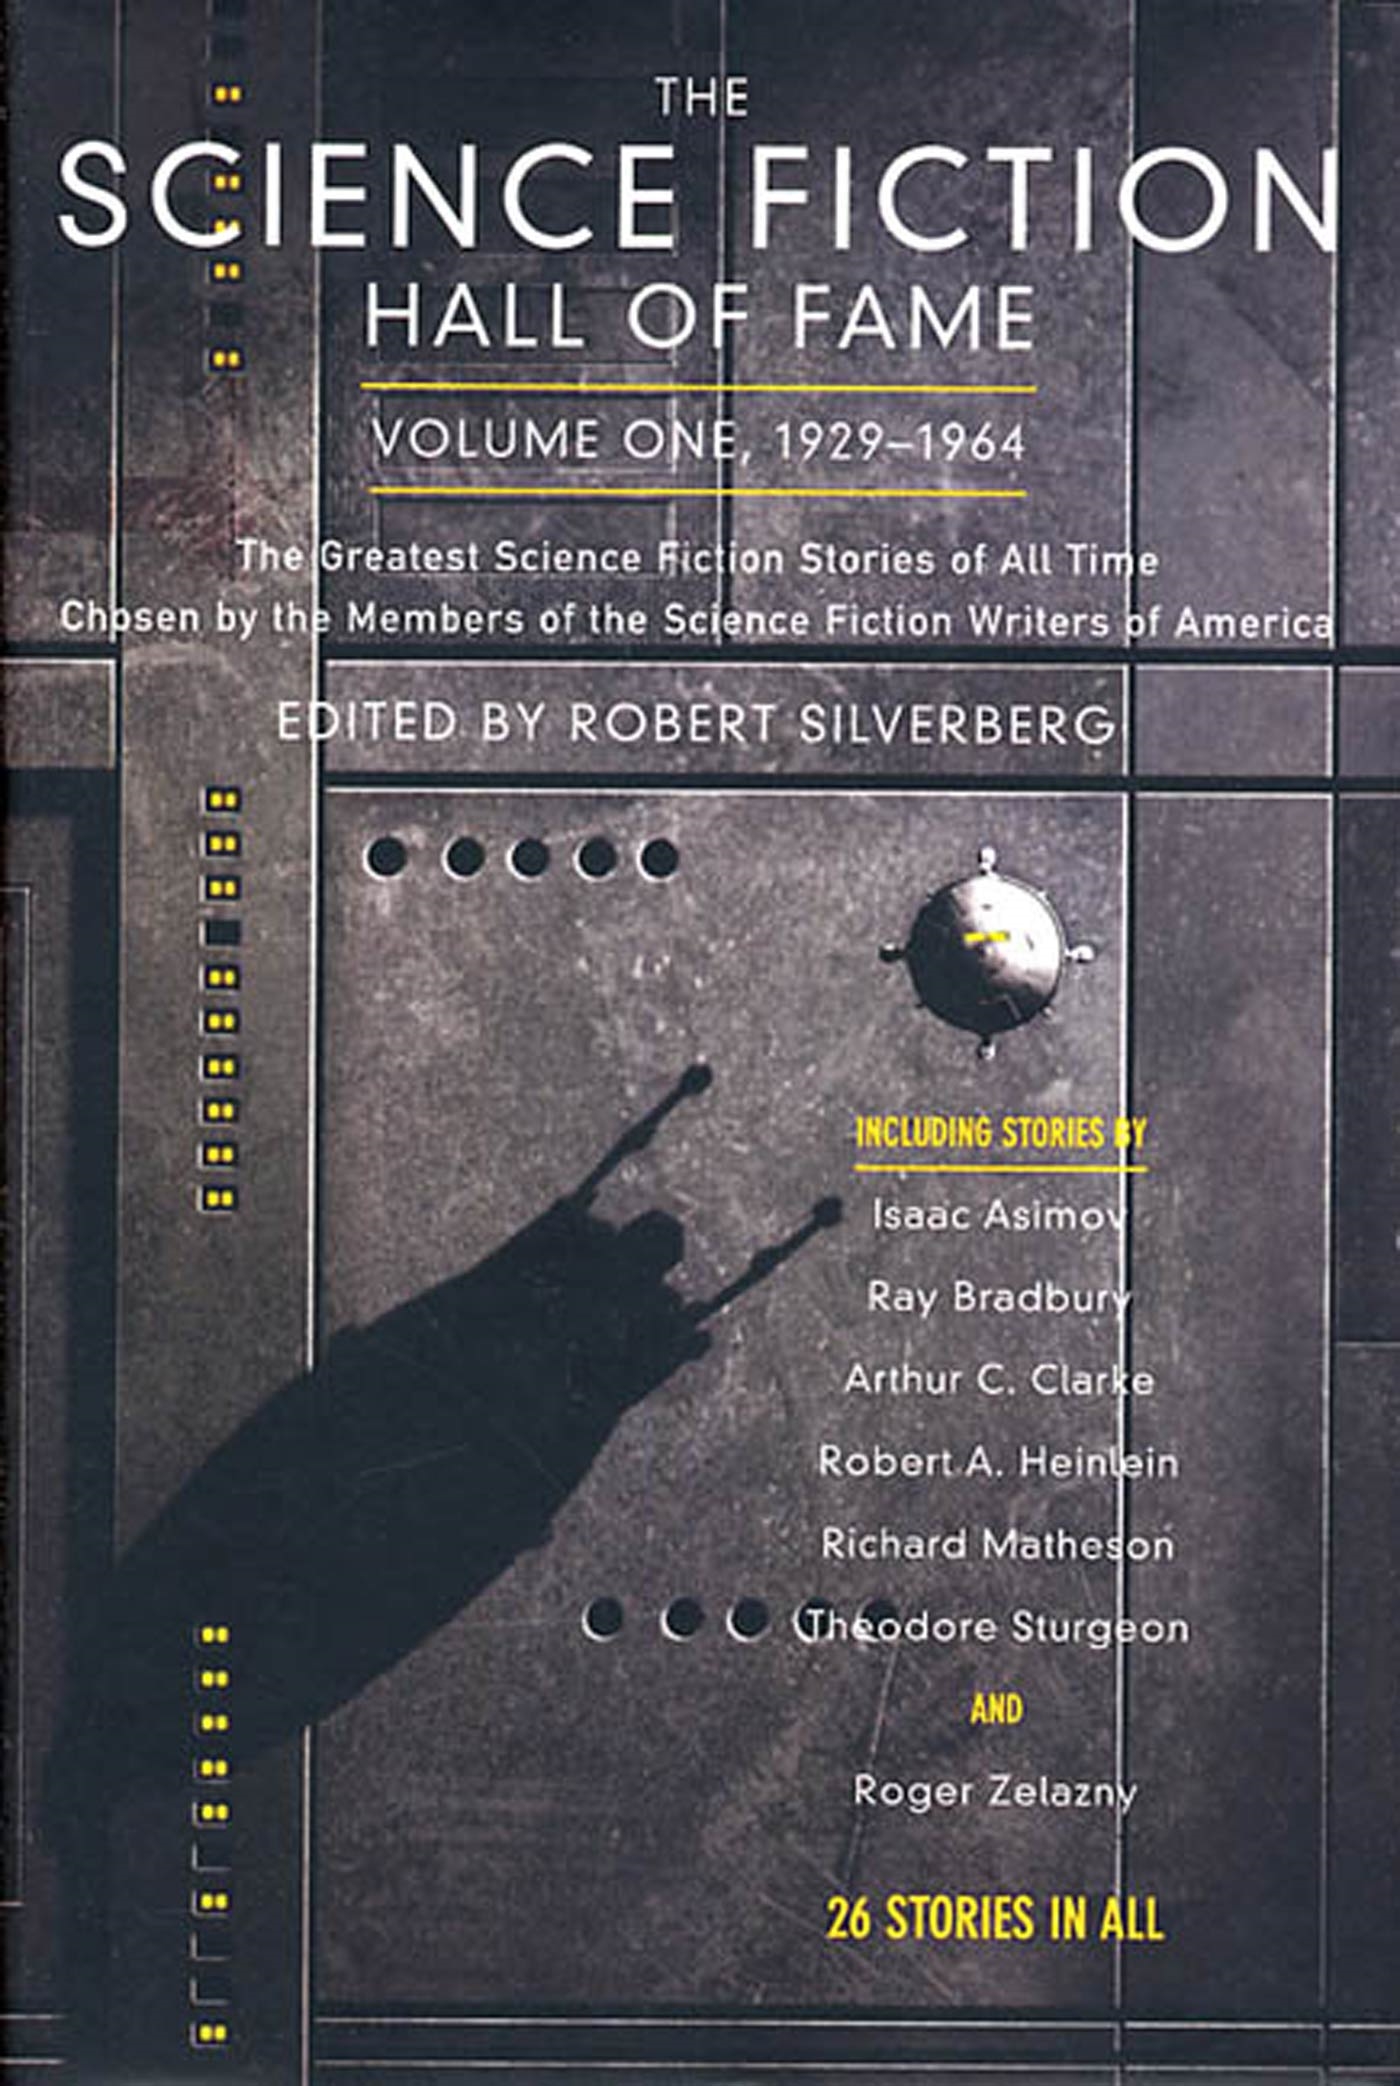 The Science Fiction Hall of Fame, Volume One 1929-1964 : The Greatest Science Fiction Stories of All Time Chosen by the Members of the Science Fiction Writers of America by Robert Silverberg